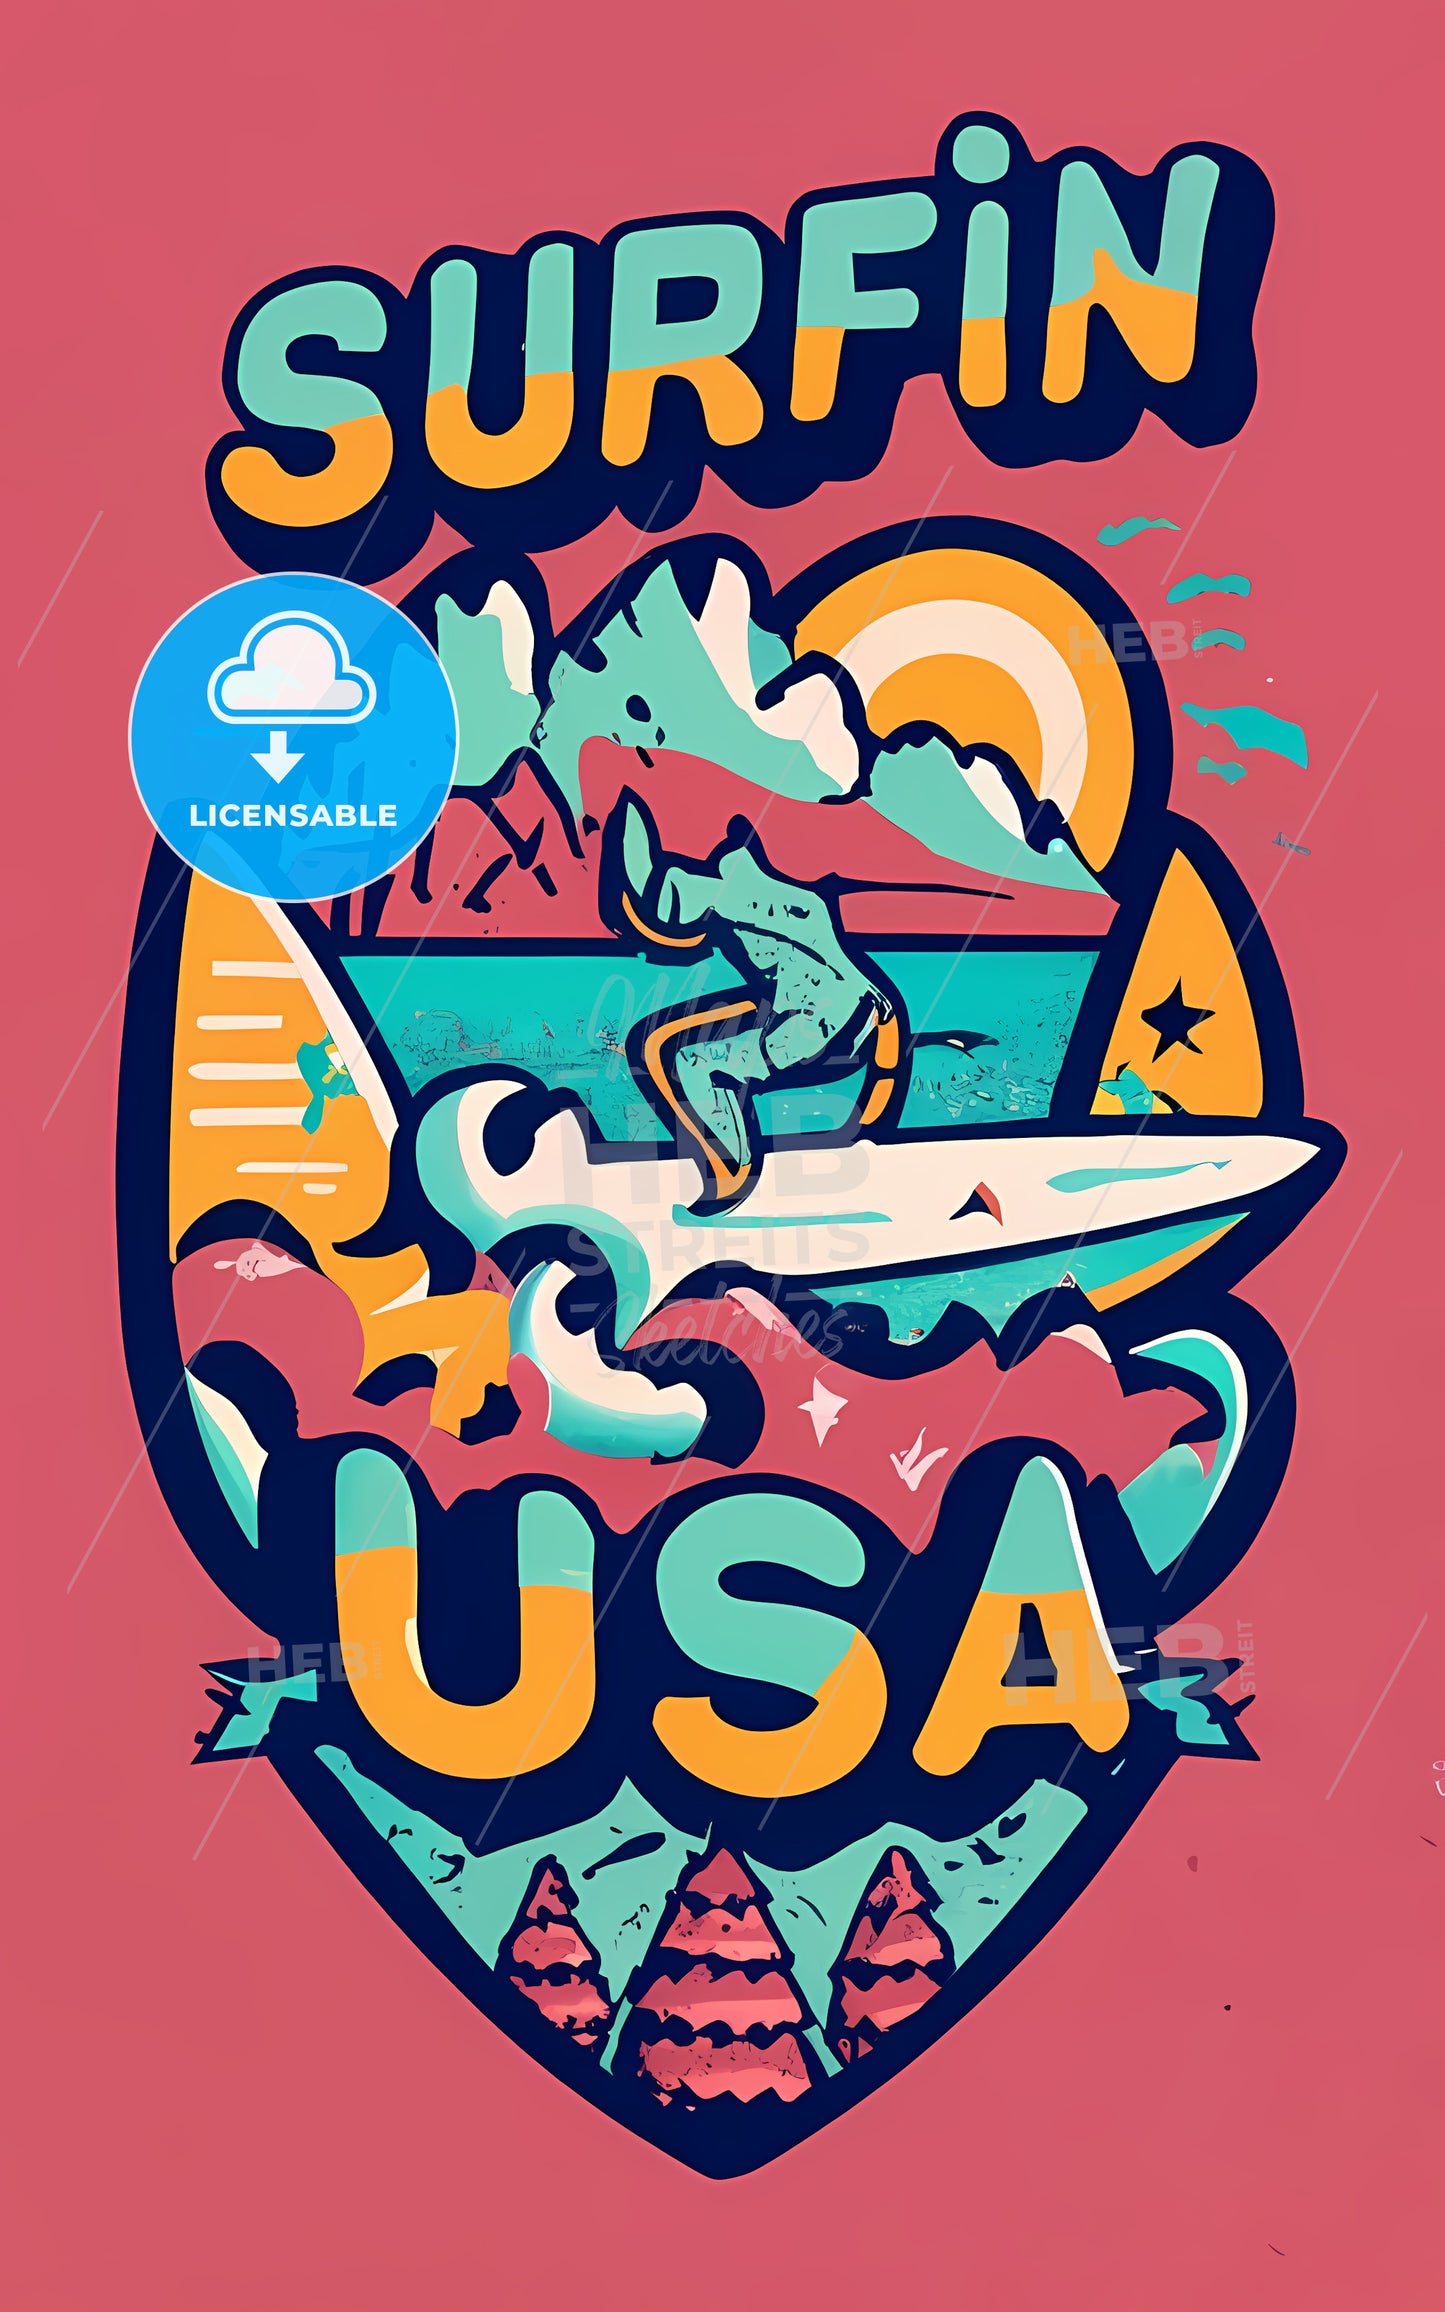 Surfin Usa - A Colorful Logo With A Man On A Surfboard